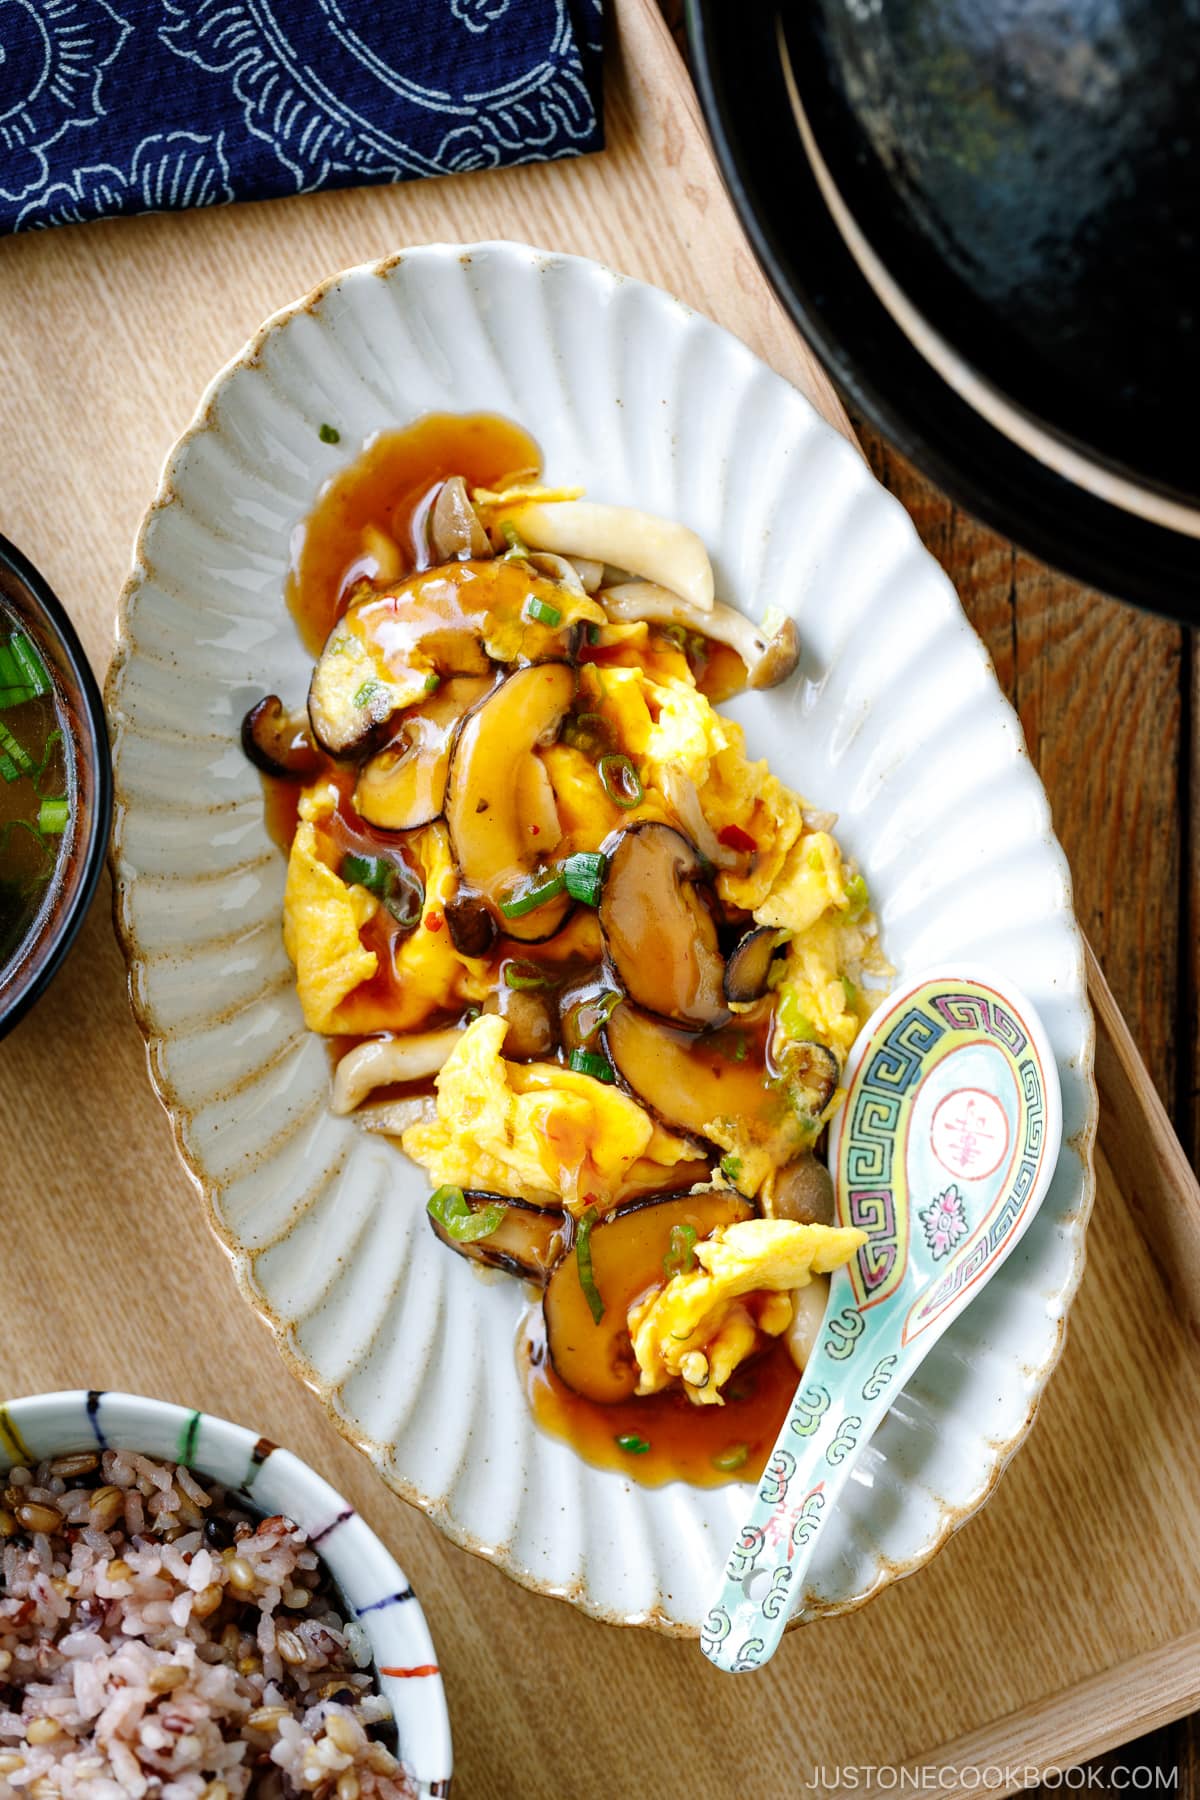 A fluted oval shape containing stir-fried mushrooms and eggs drizzled with ankake sauce.